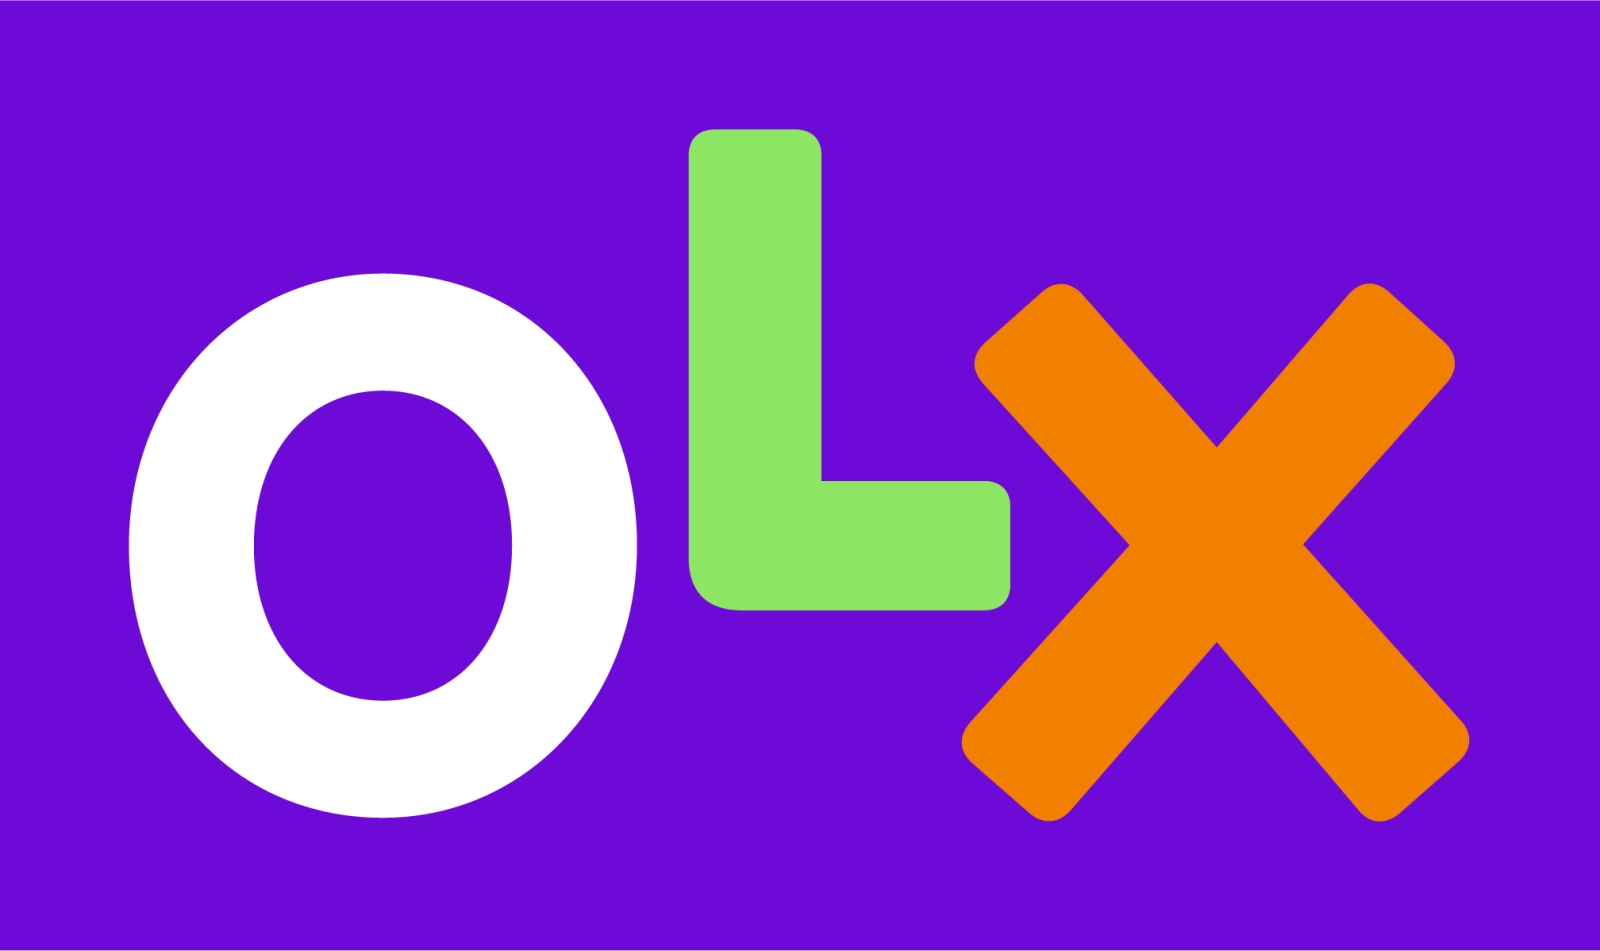 OLX is speculating about the coronavirus